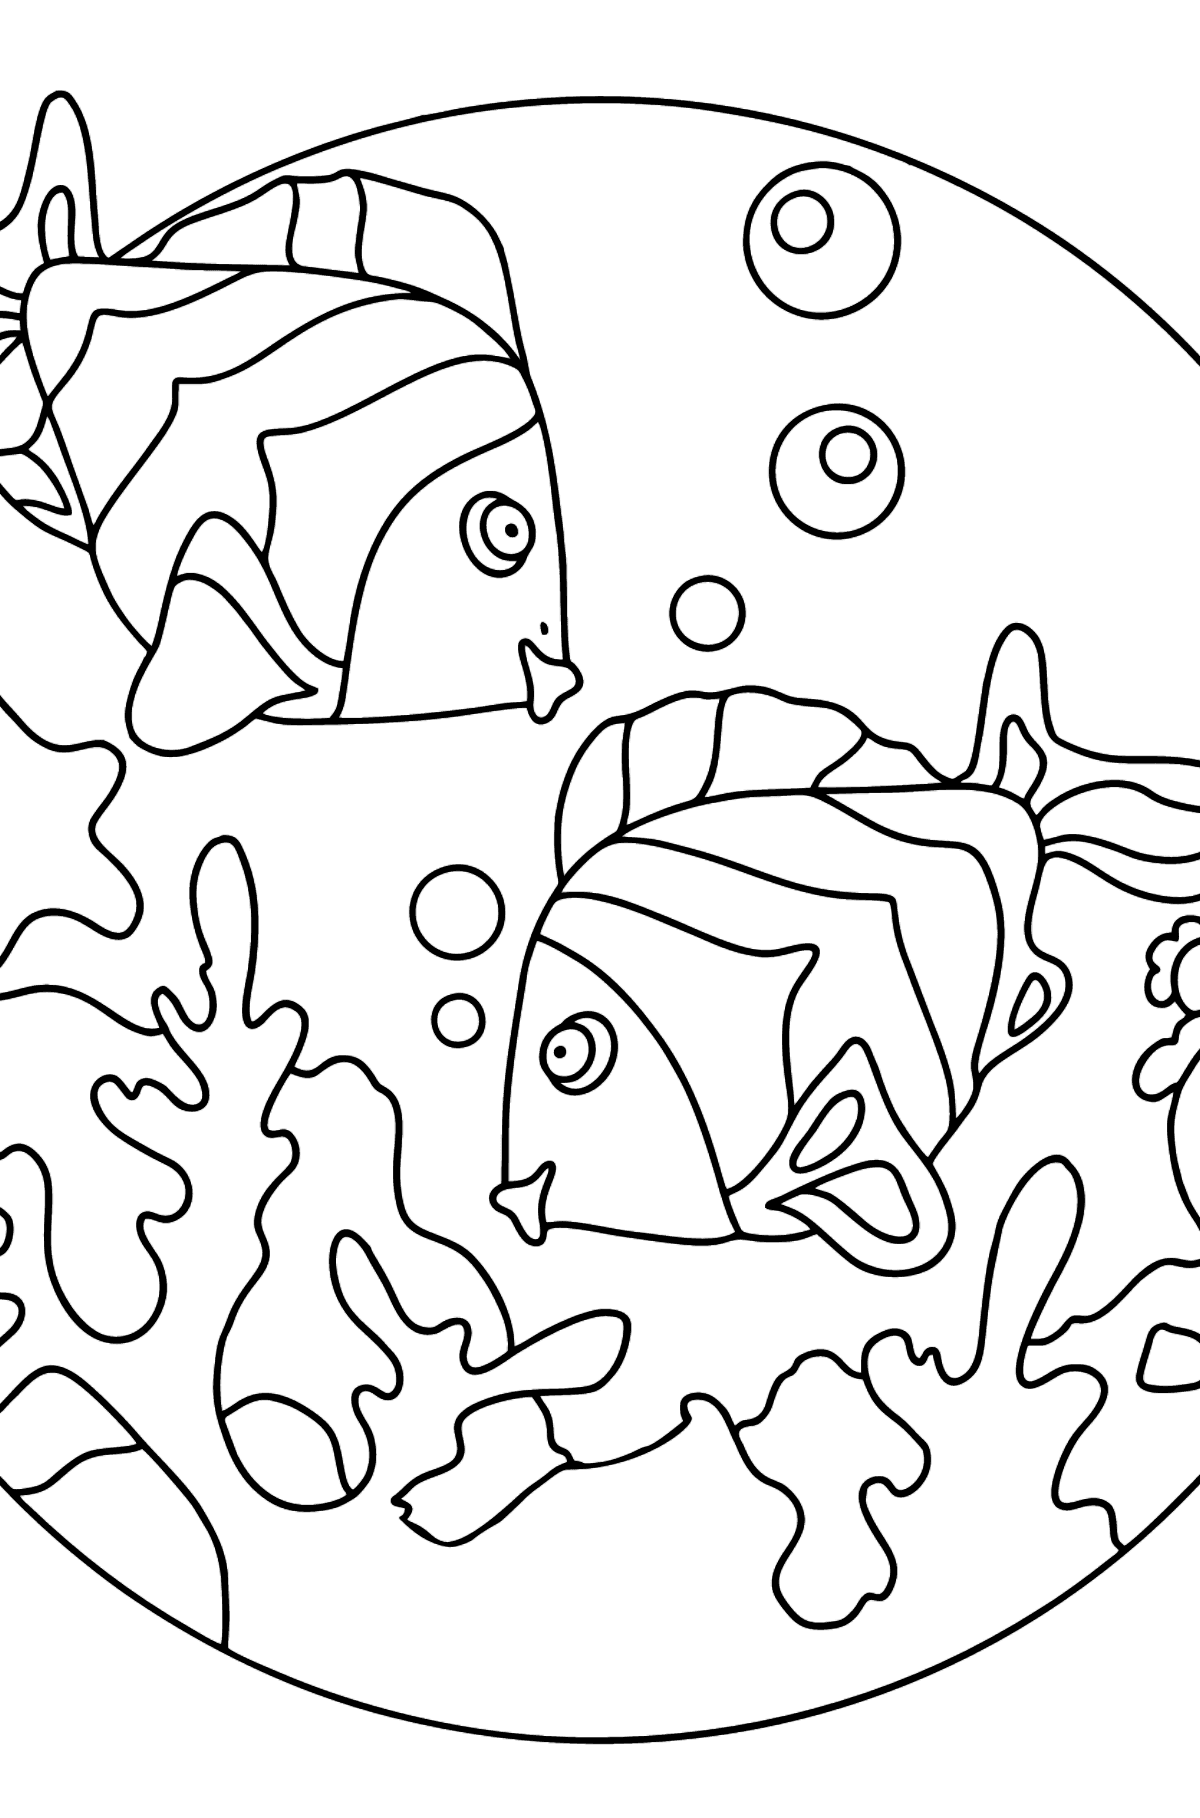 Coloring Page - Fish are Swimming Together - Coloring Pages for Kids